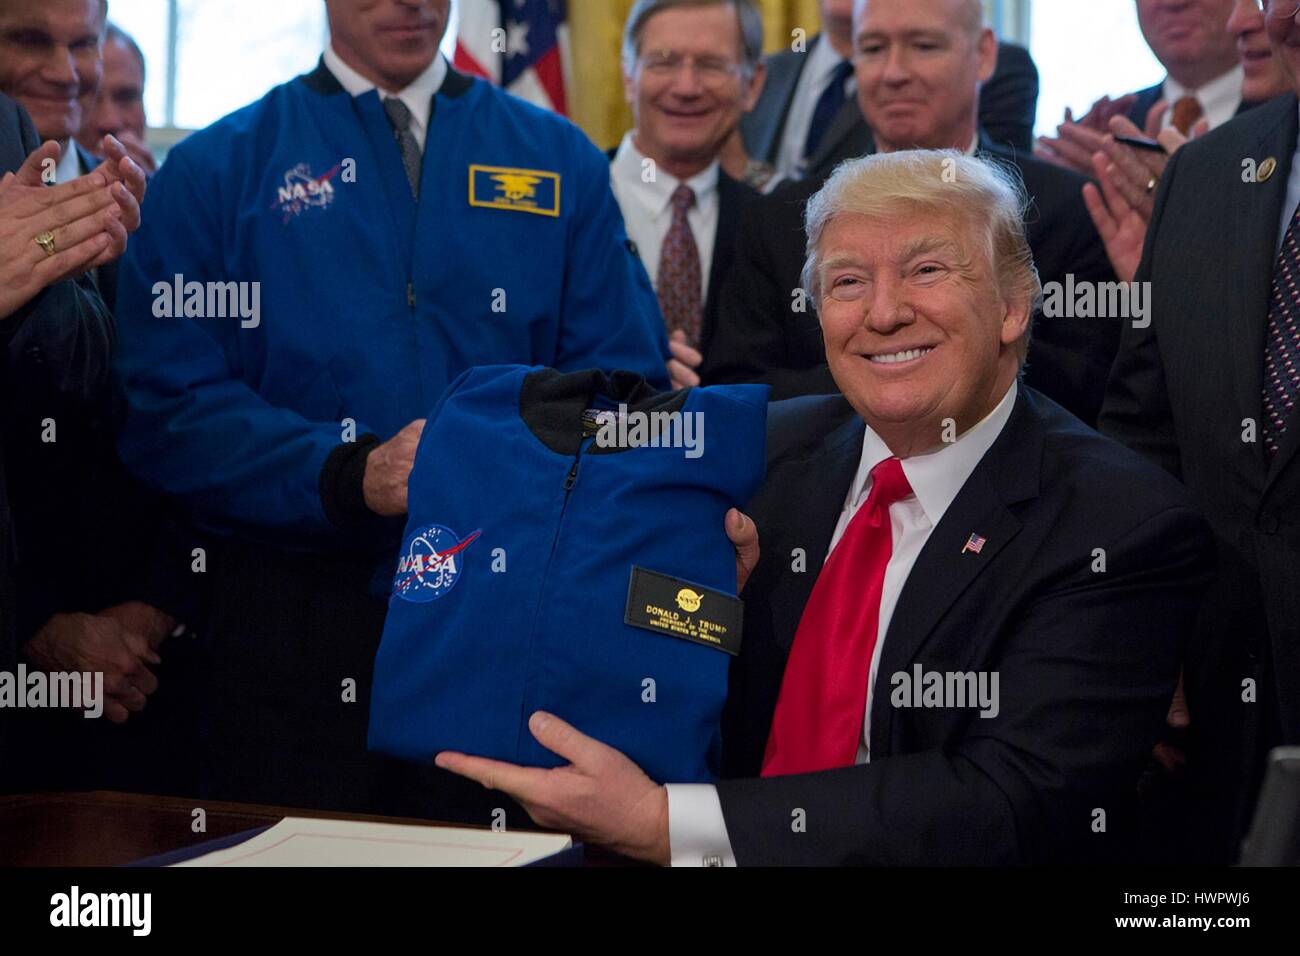 U.S. President Donald Trump smiles as he holds up a NASA flight jacket presented after signing the NASA Transition Authorization Act of 2017 in the Oval Office of the White House March 21, 2017 in Washington, D.C. Stock Photo